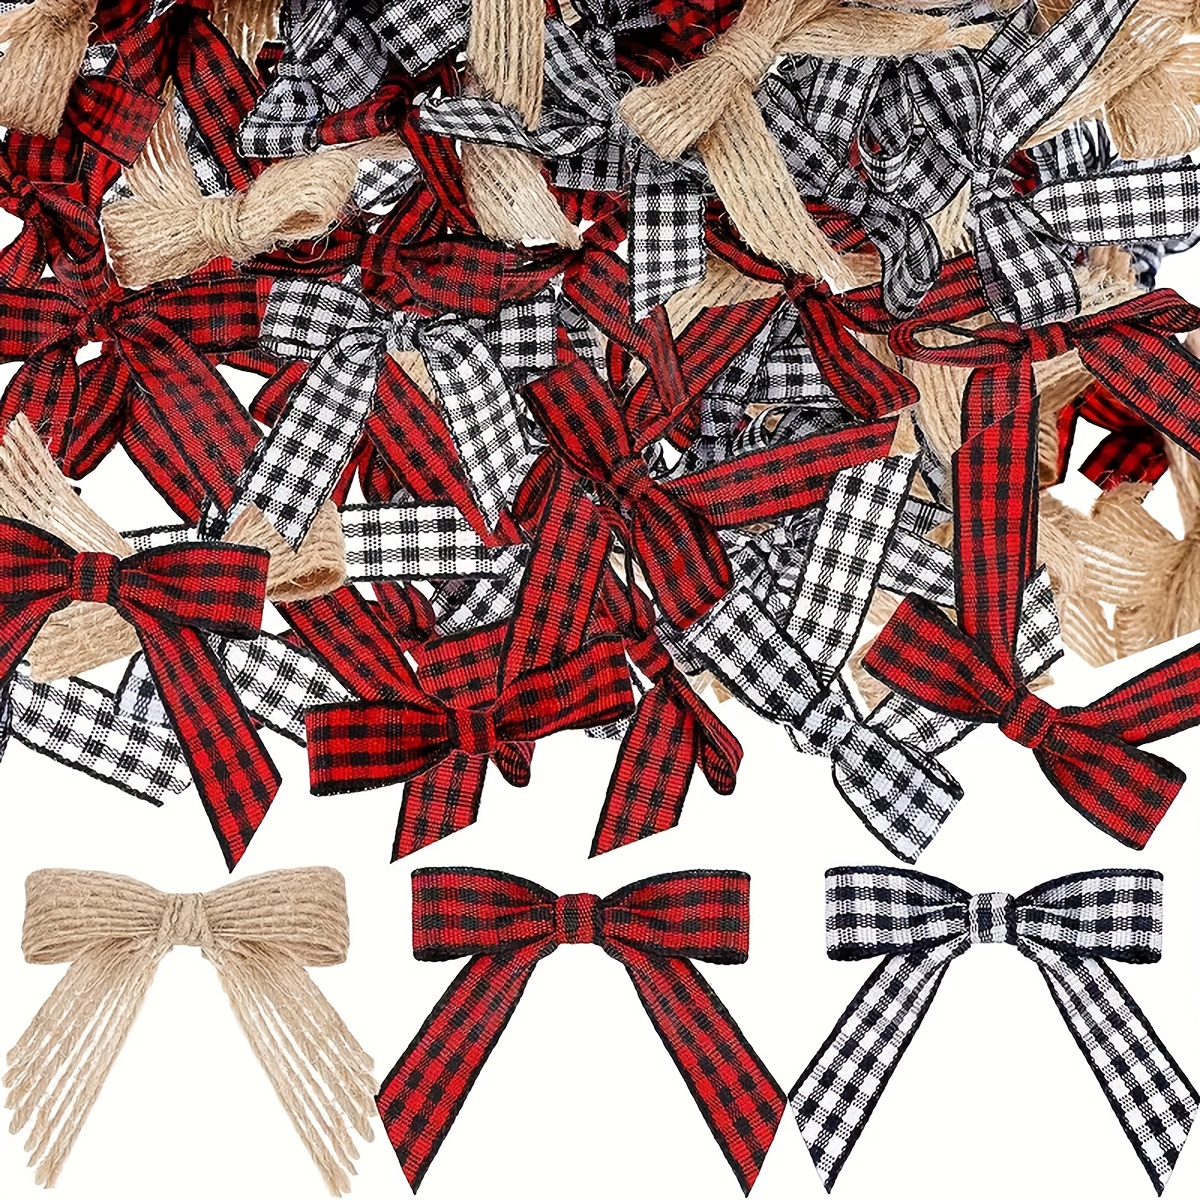 Geosar Christmas Door Bows Ribbon Kitchen Decorations Cupboard Red Ribbons  Christmas Bows for Cabinet Doors Holiday Festive Cabinet Door Ribbons for